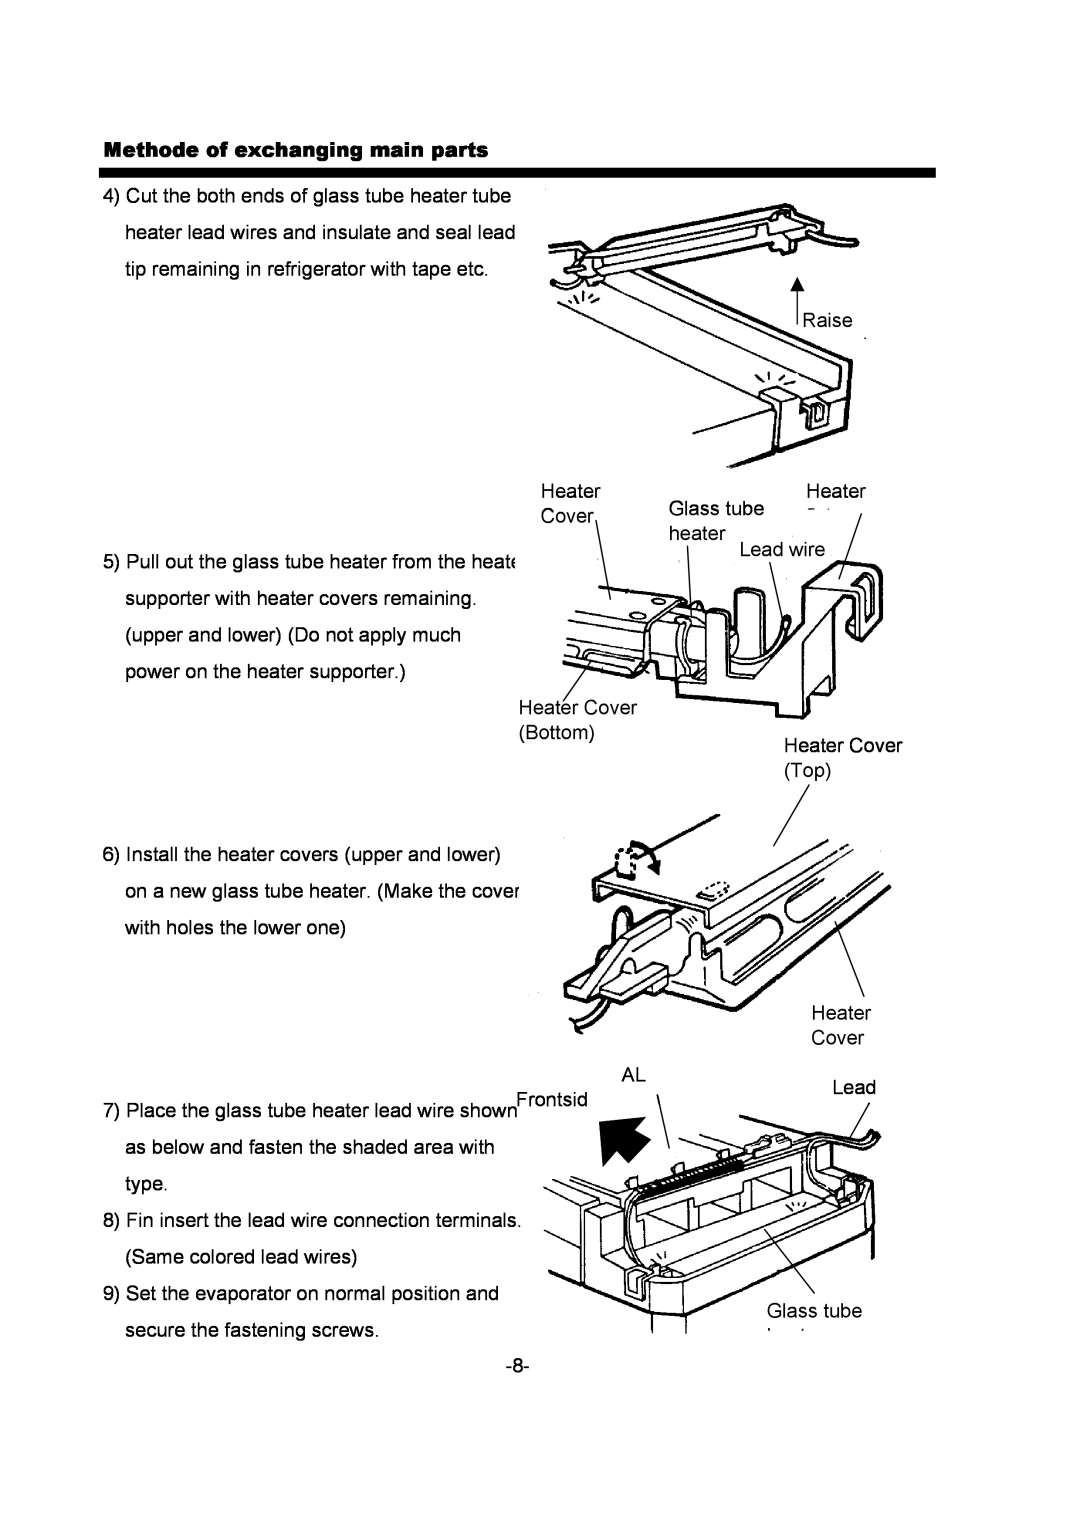 Daewoo FR-330 service manual Methode of exchanging main parts, Heater Cover 